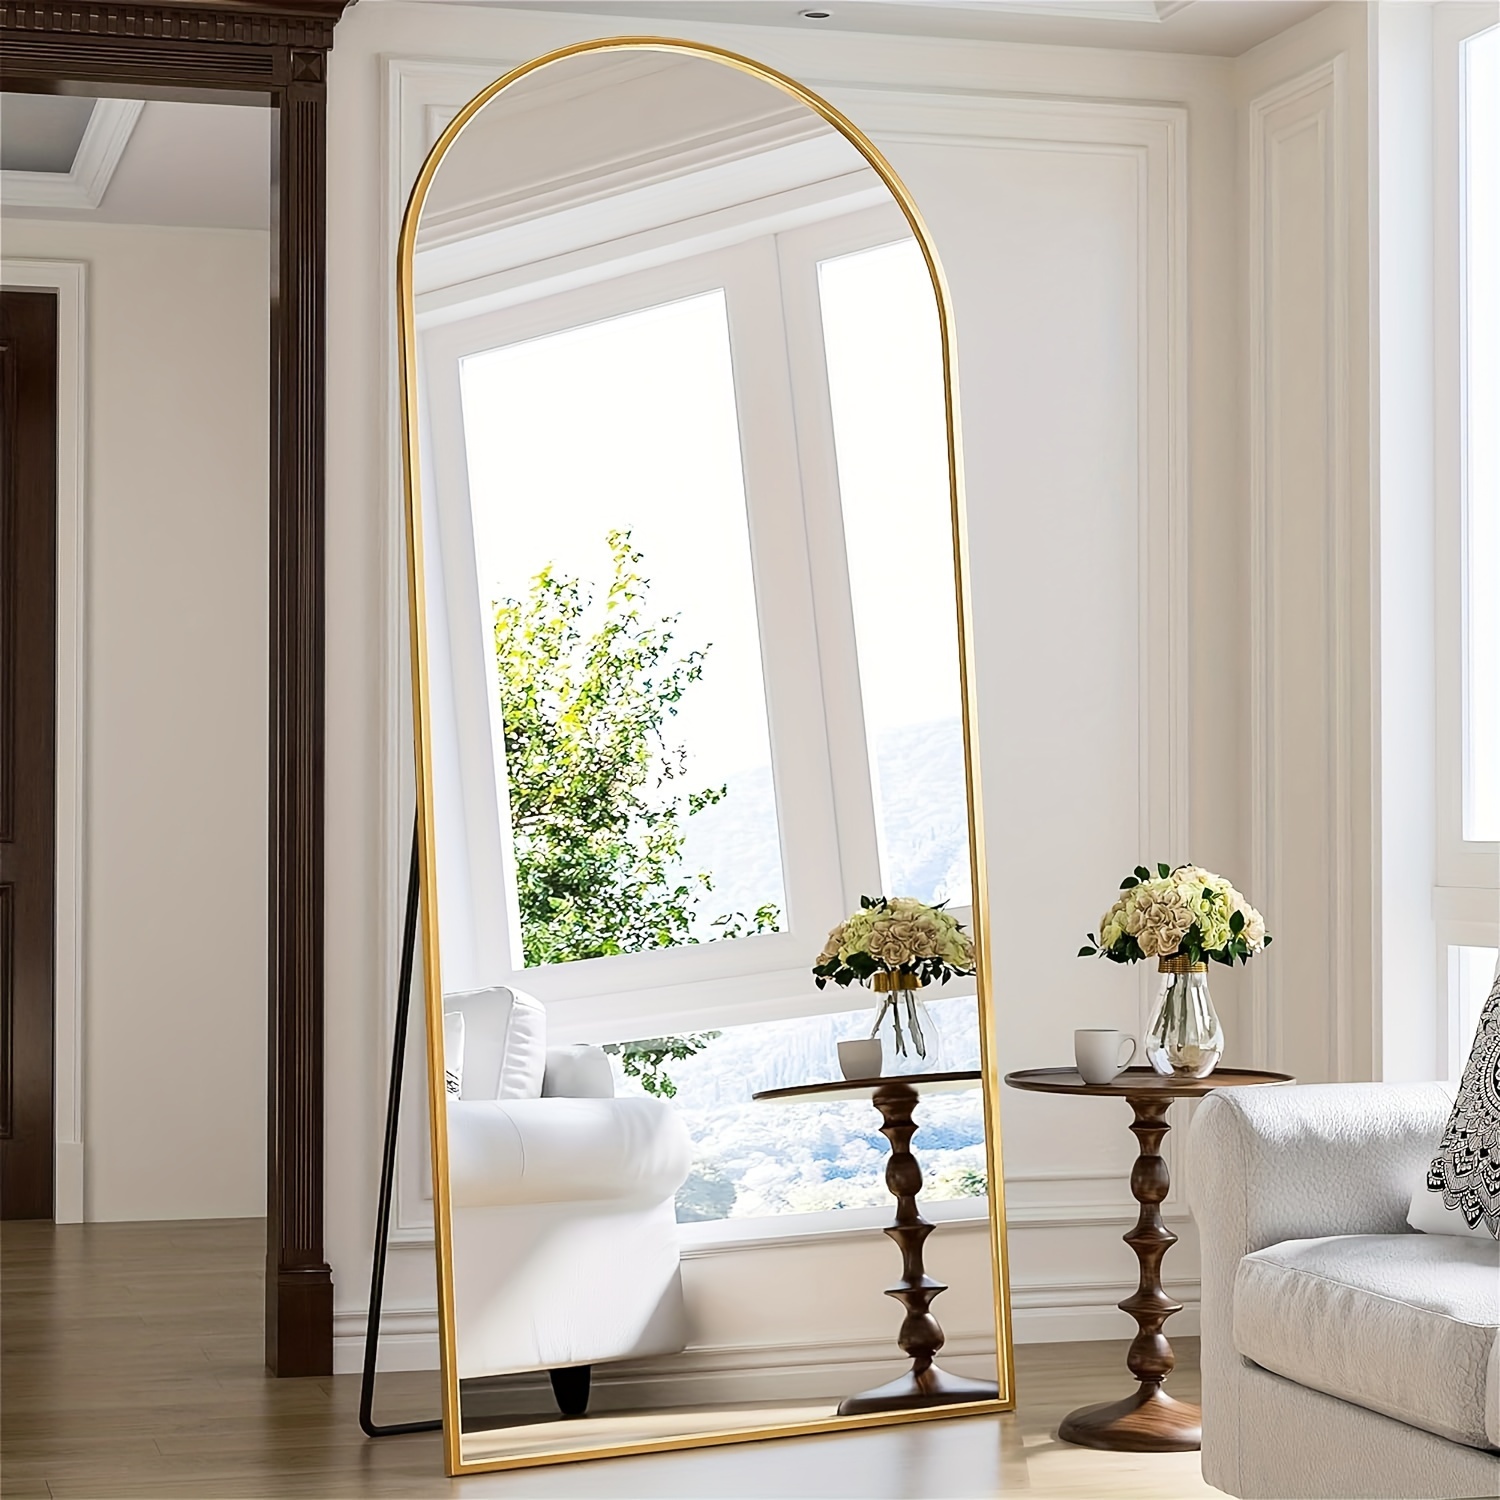 

71x30/71x26 Full Length Mirror, Arched , Oversized Standing Mirror, Hanging Or Leaning Against Wall Mounted Mirror, Large Full Body Mirror With Aluminum Frame For Bedroom